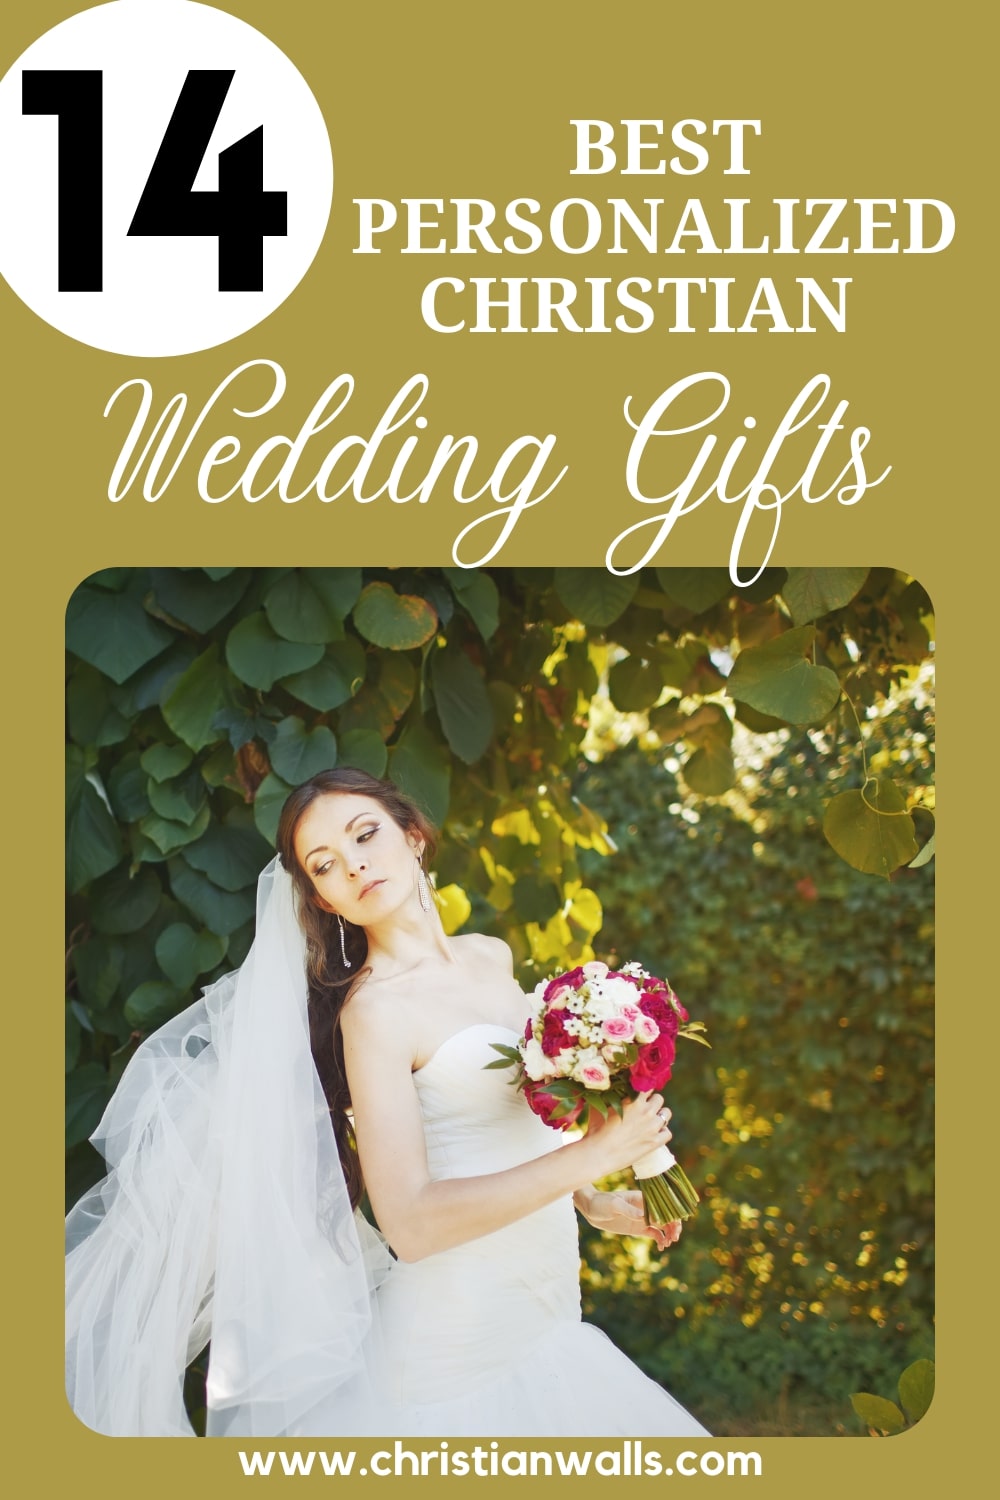 14 Best Personalized Christian Wedding Gifts (Cute for Couples too!)